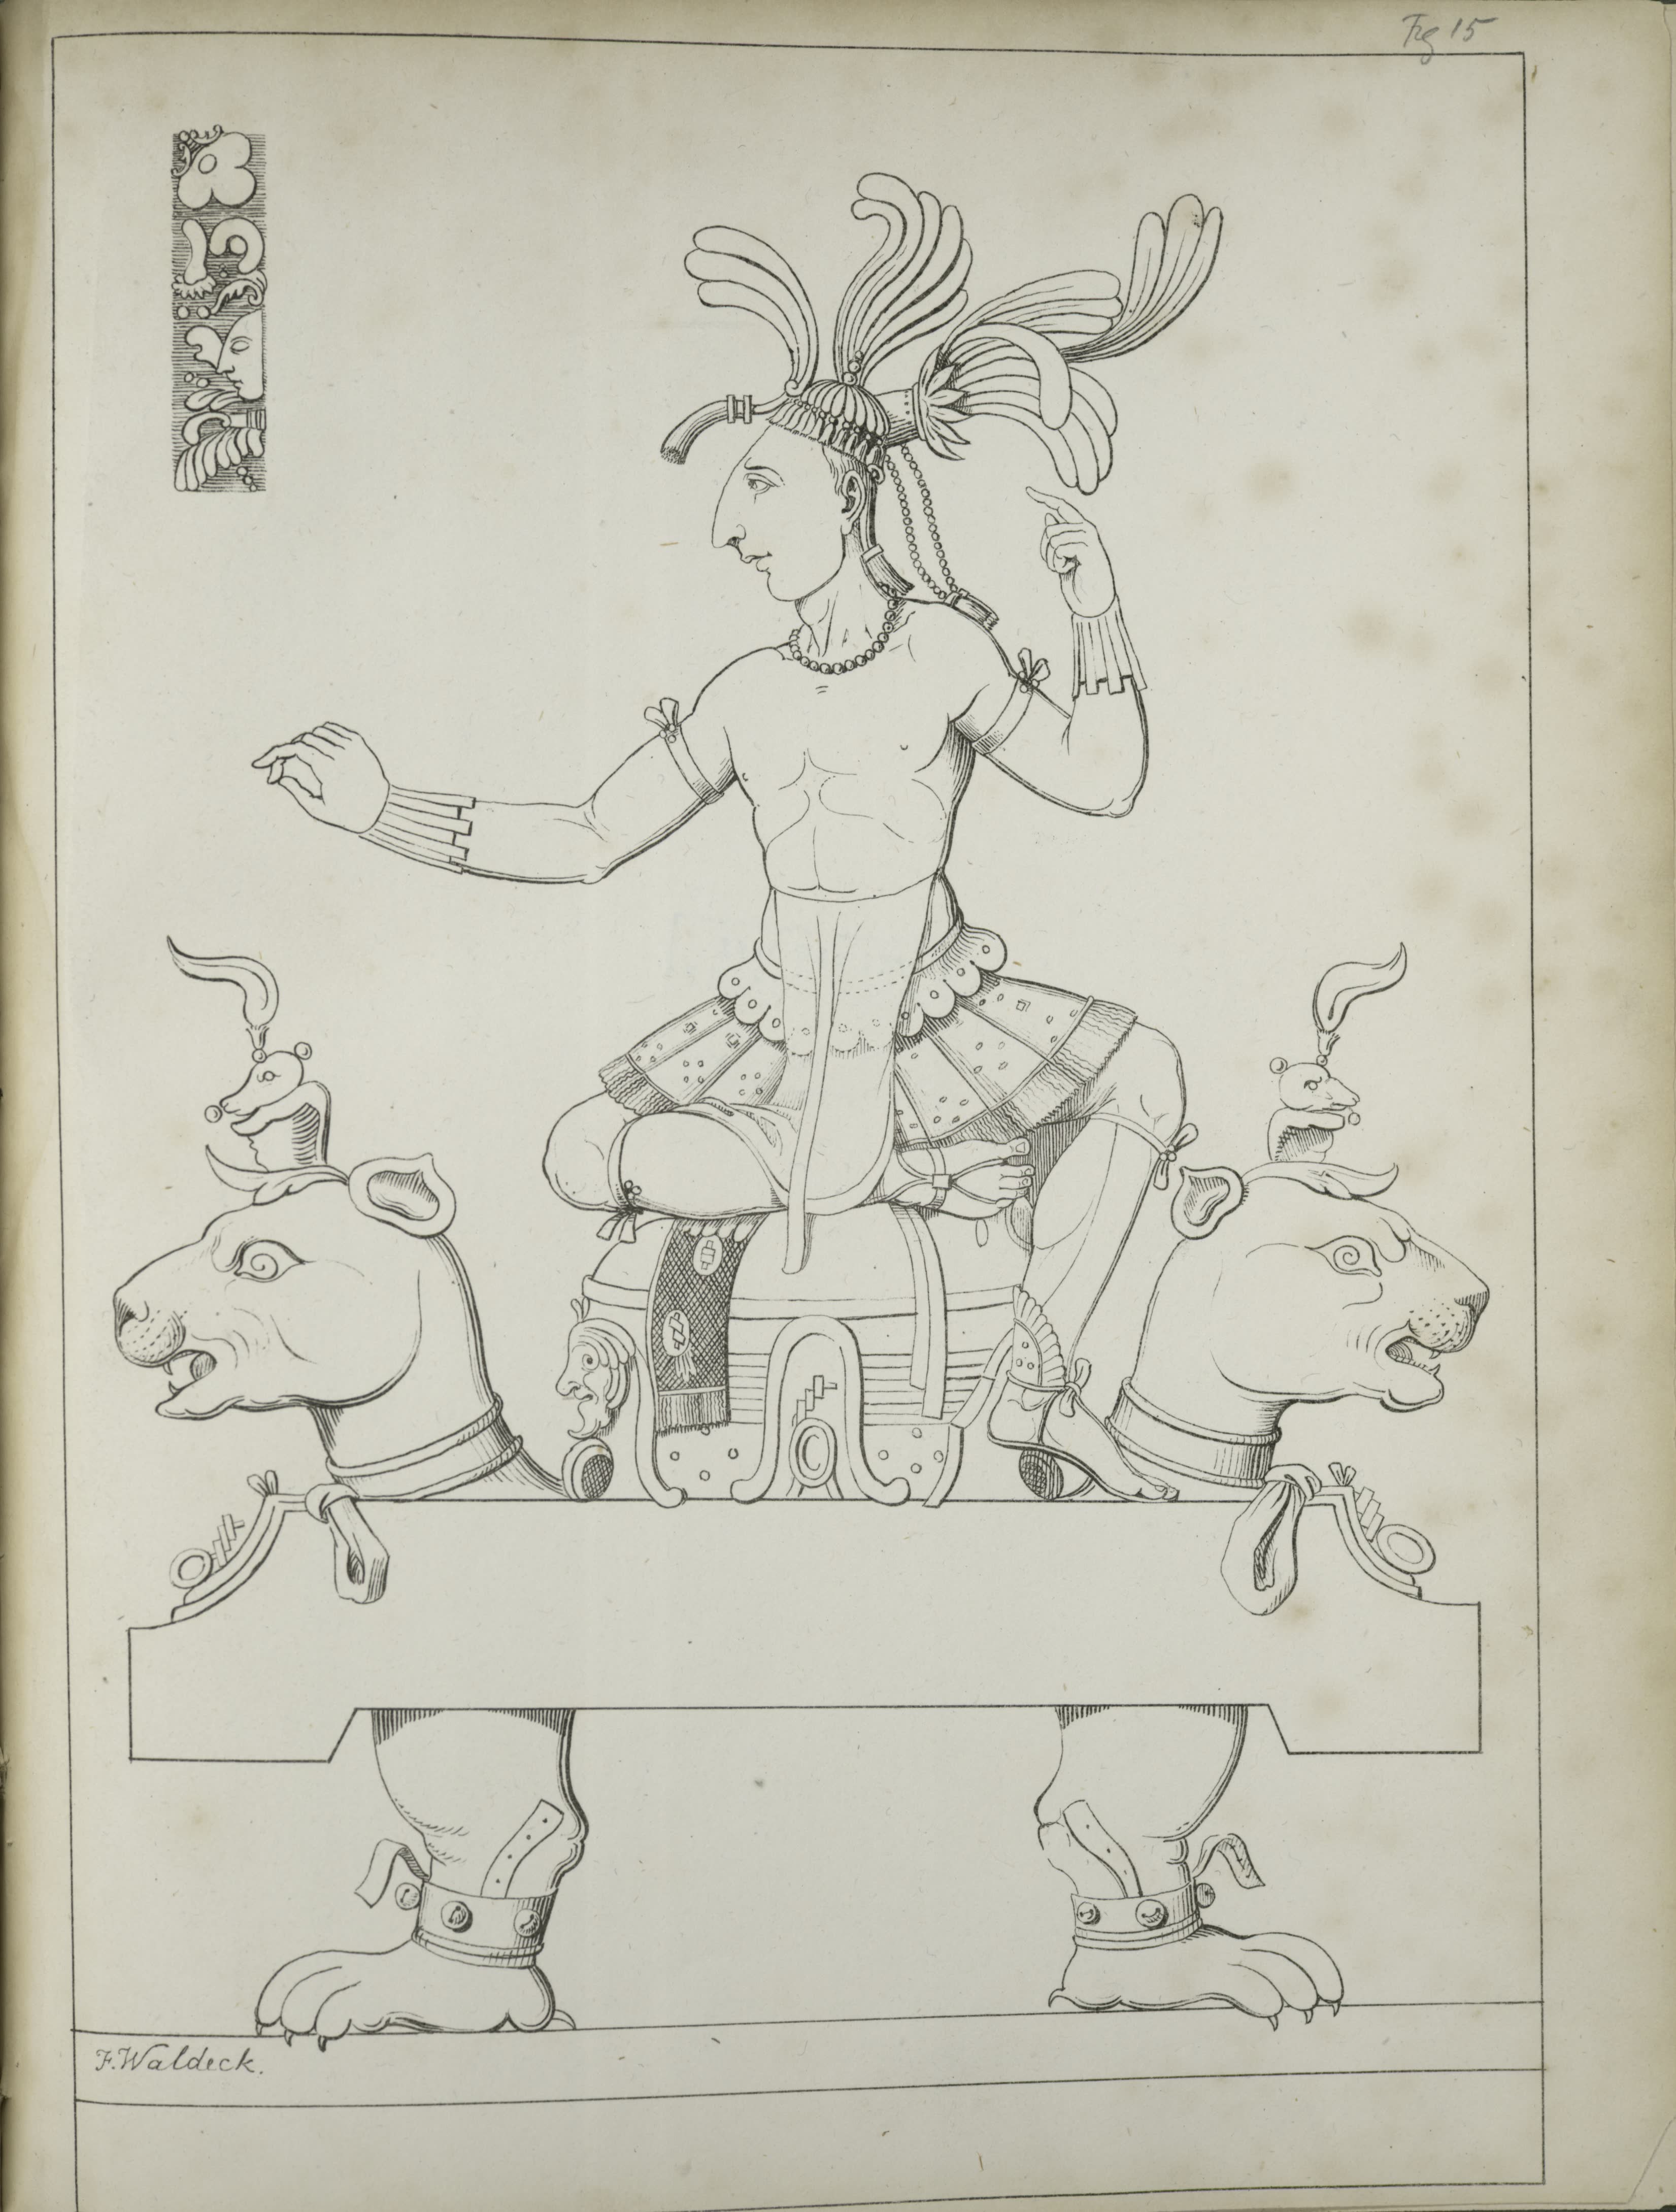 Description of the Ruins of an Ancient City - Figure seated on a bench in the form of an animal (1822)